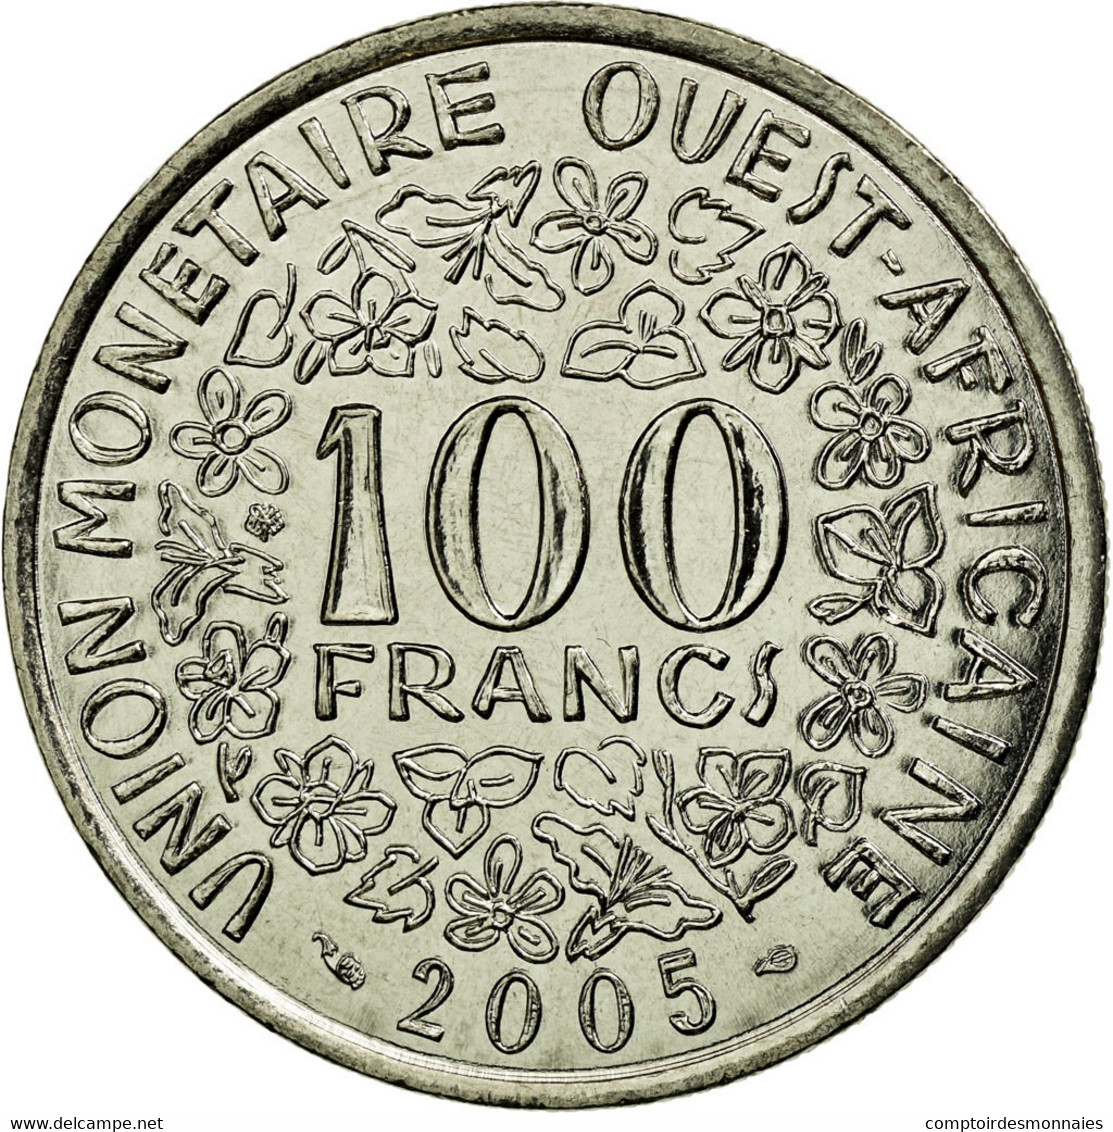 Monnaie, West African States, 100 Francs, 2005, SUP, Nickel, KM:4 - Costa D'Avorio